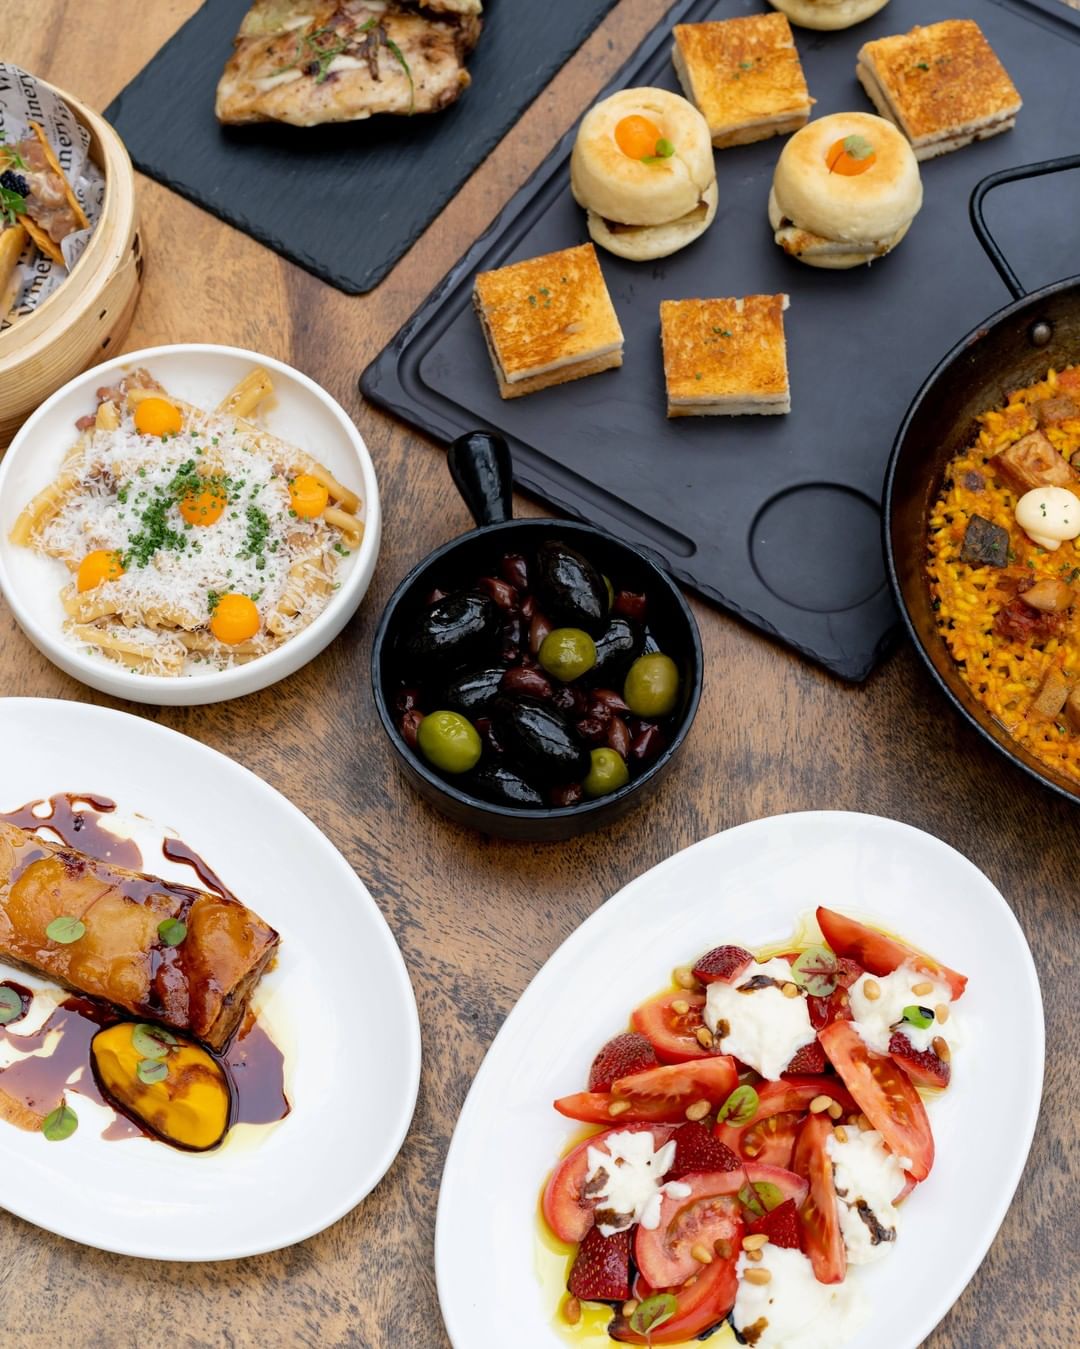 The Winery Tapas Bar Mother's Day Deals At Capitol Singapore & CHIJMES